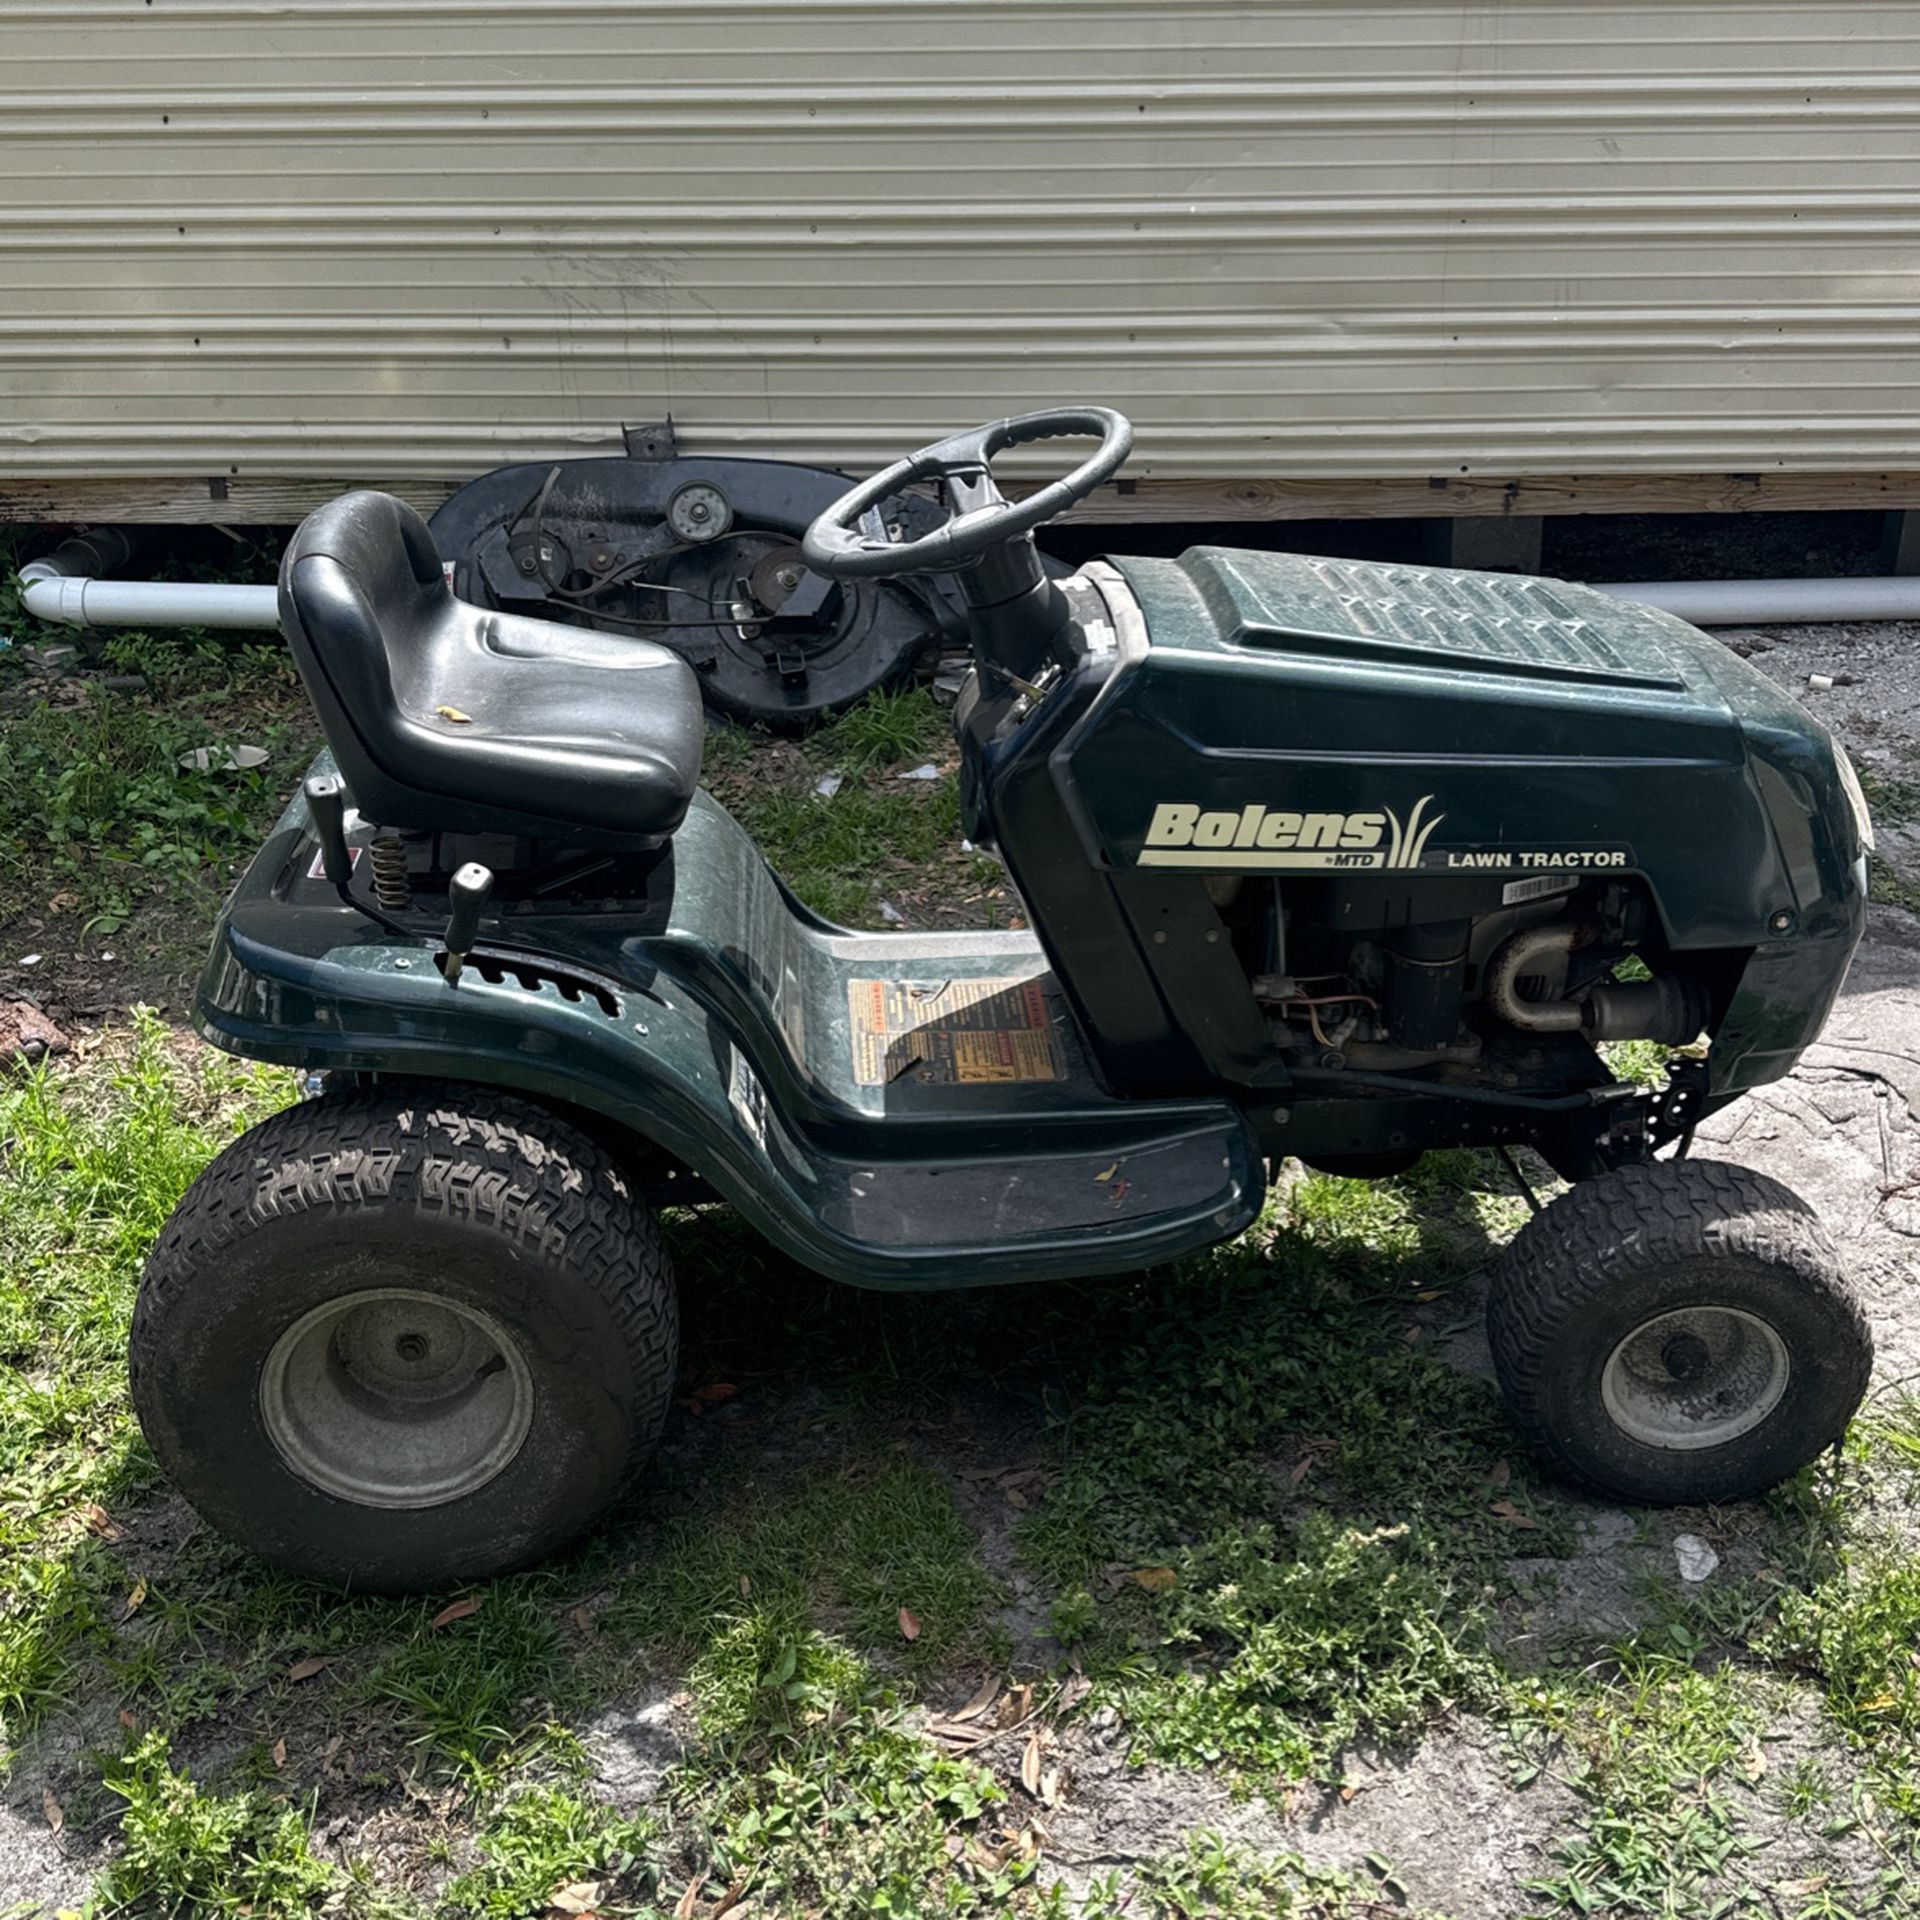 Bowling lawn tractor